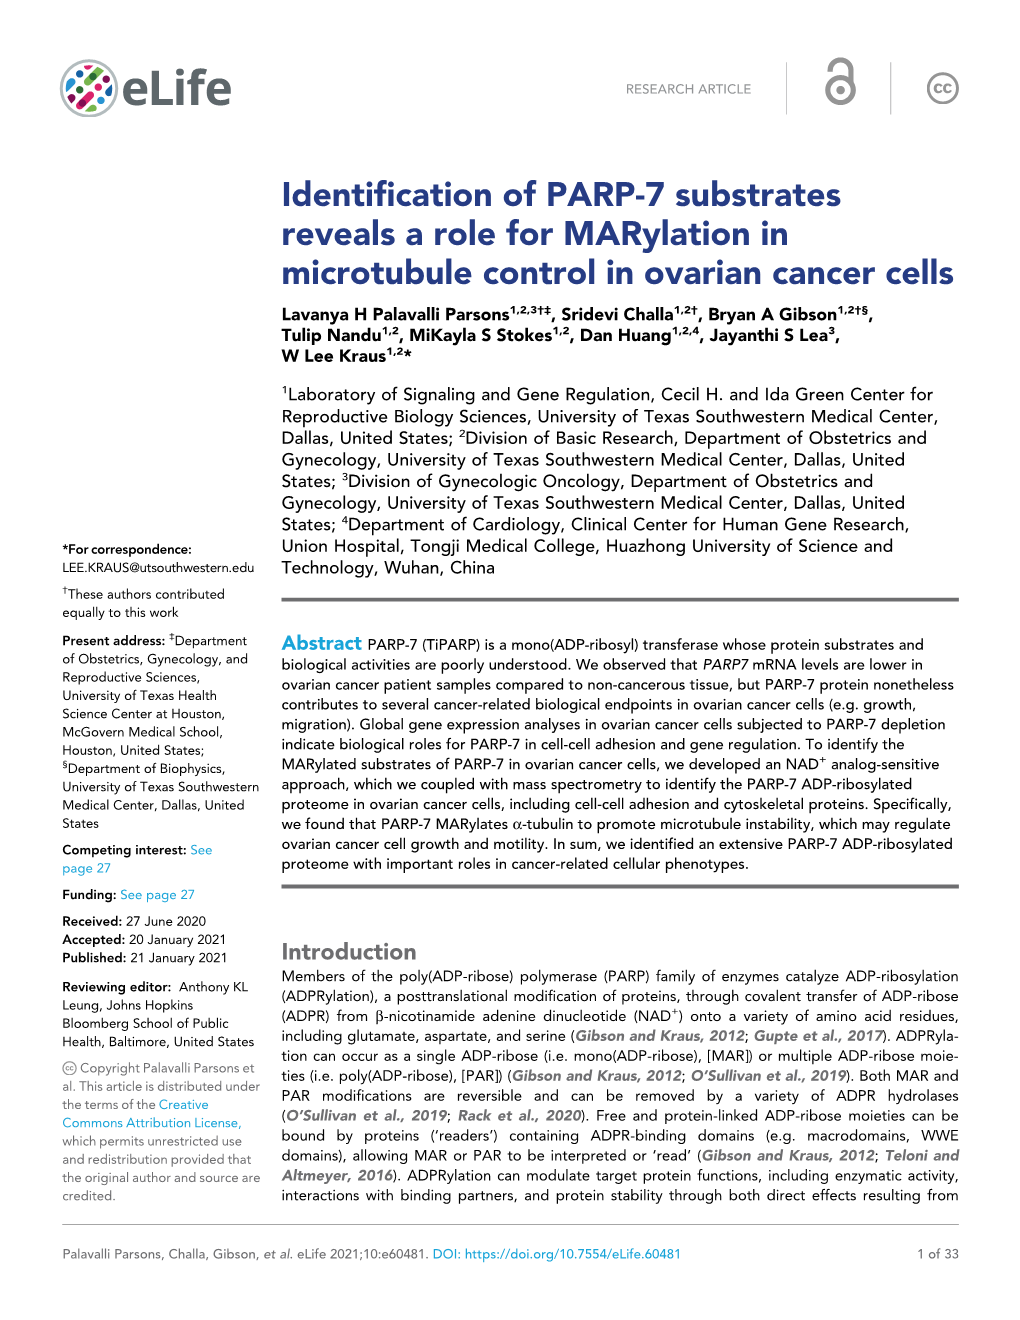 Identification of PARP-7 Substrates Reveals a Role for Marylation